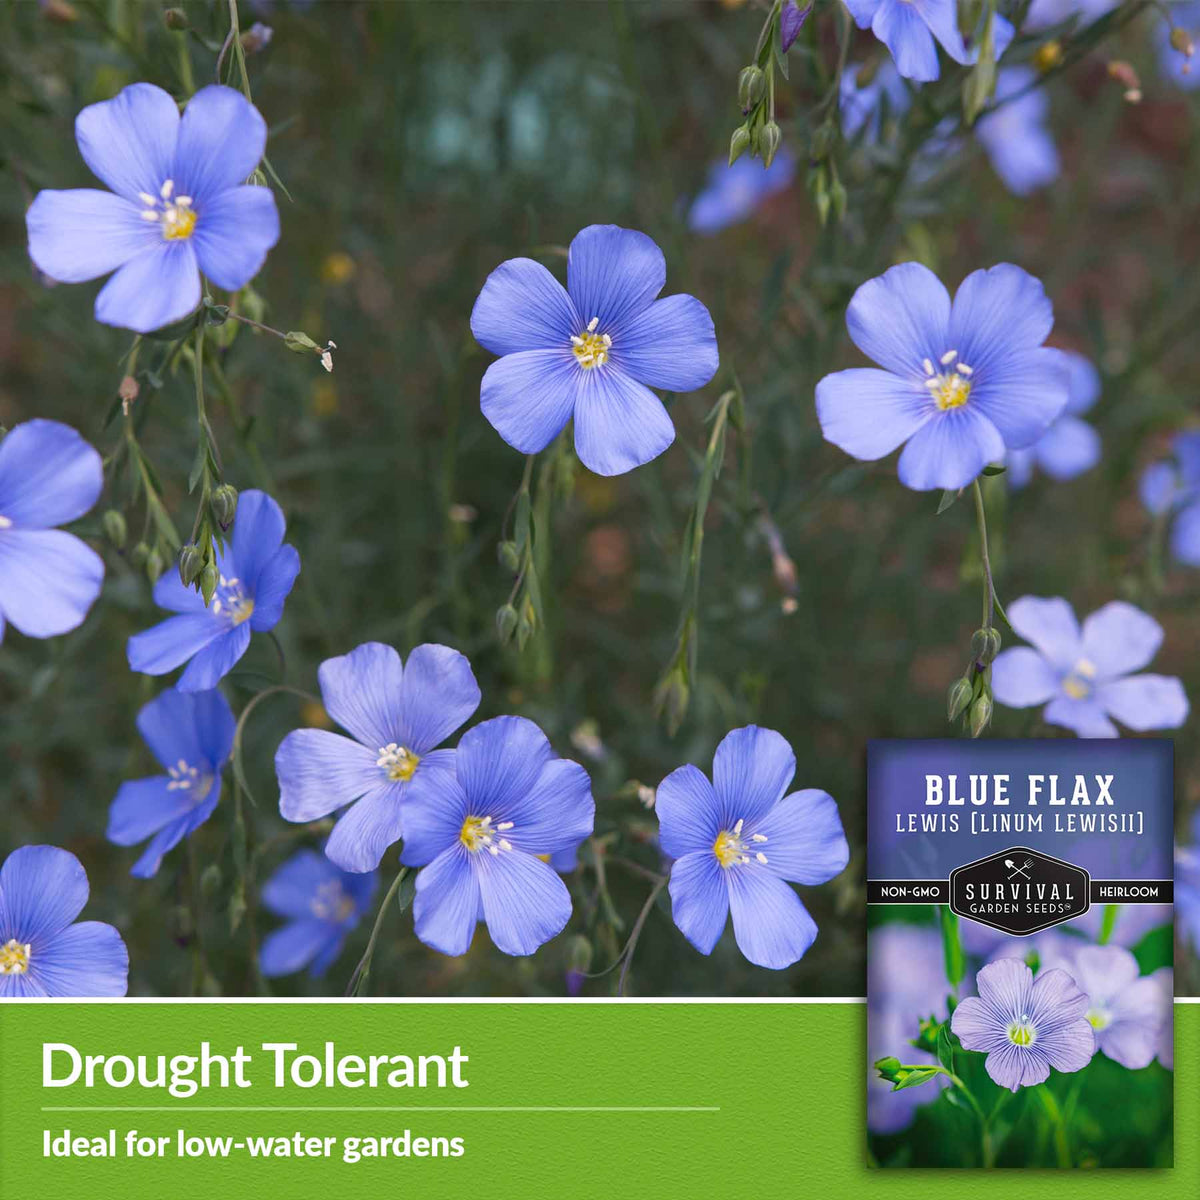 Drought tolerant - ideal for low water gardens